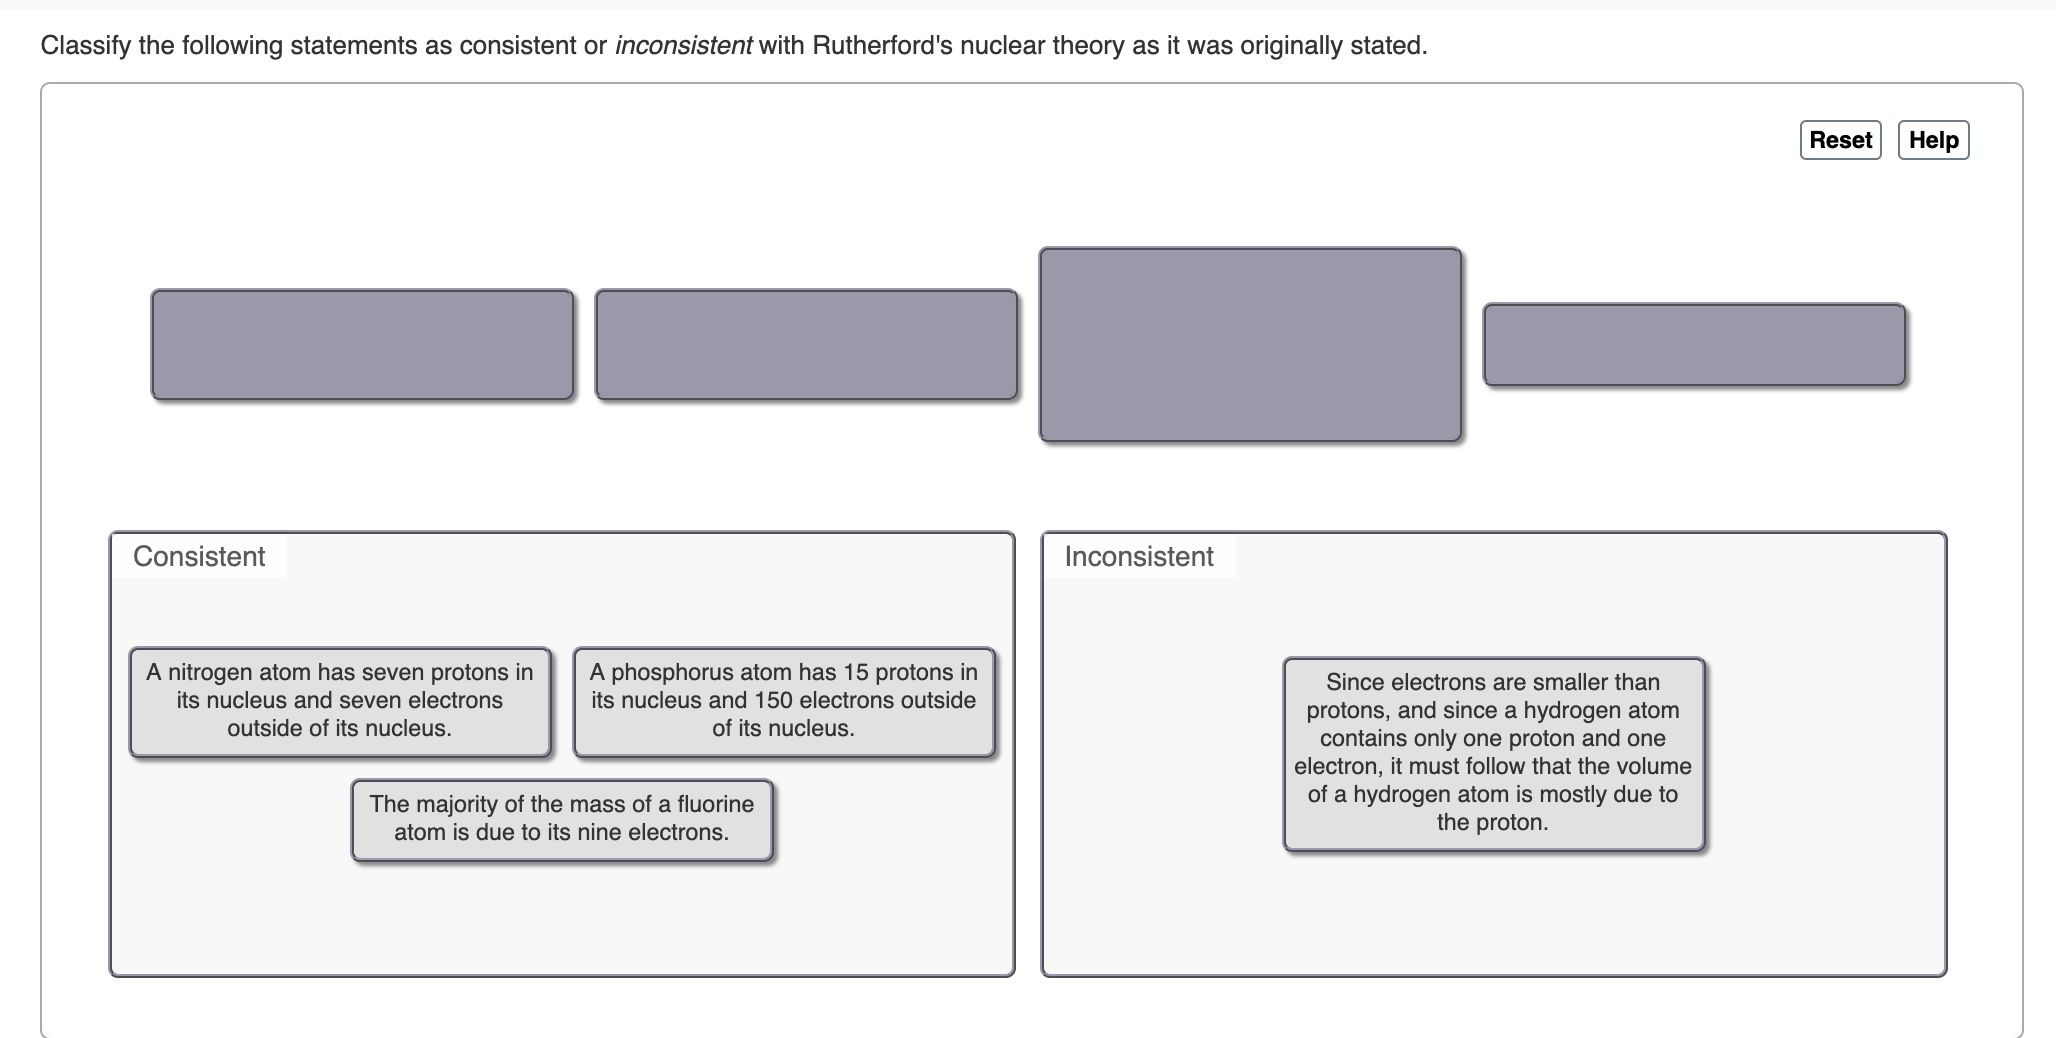 Classify the following statements as consistent or inconsistent with Rutherford's nuclear theory as it was
originally stated.
Help
Reset
Consistent
Inconsistent
A nitrogen atom has seven protons in
its nucleus and seven electrons
A phosphorus atom has 15 protons in
its nucleus and 150 electrons outside
Since electrons are smaller than
protons, and since a hydrogen atom
contains only one proton and one
electron, it must follow that the volume
of a hydrogen atom is mostly due to
the proton.
outside of its nucleus.
of its nucleus.
The majority of the mass of a fluorine
atom is due to its nine electrons.
